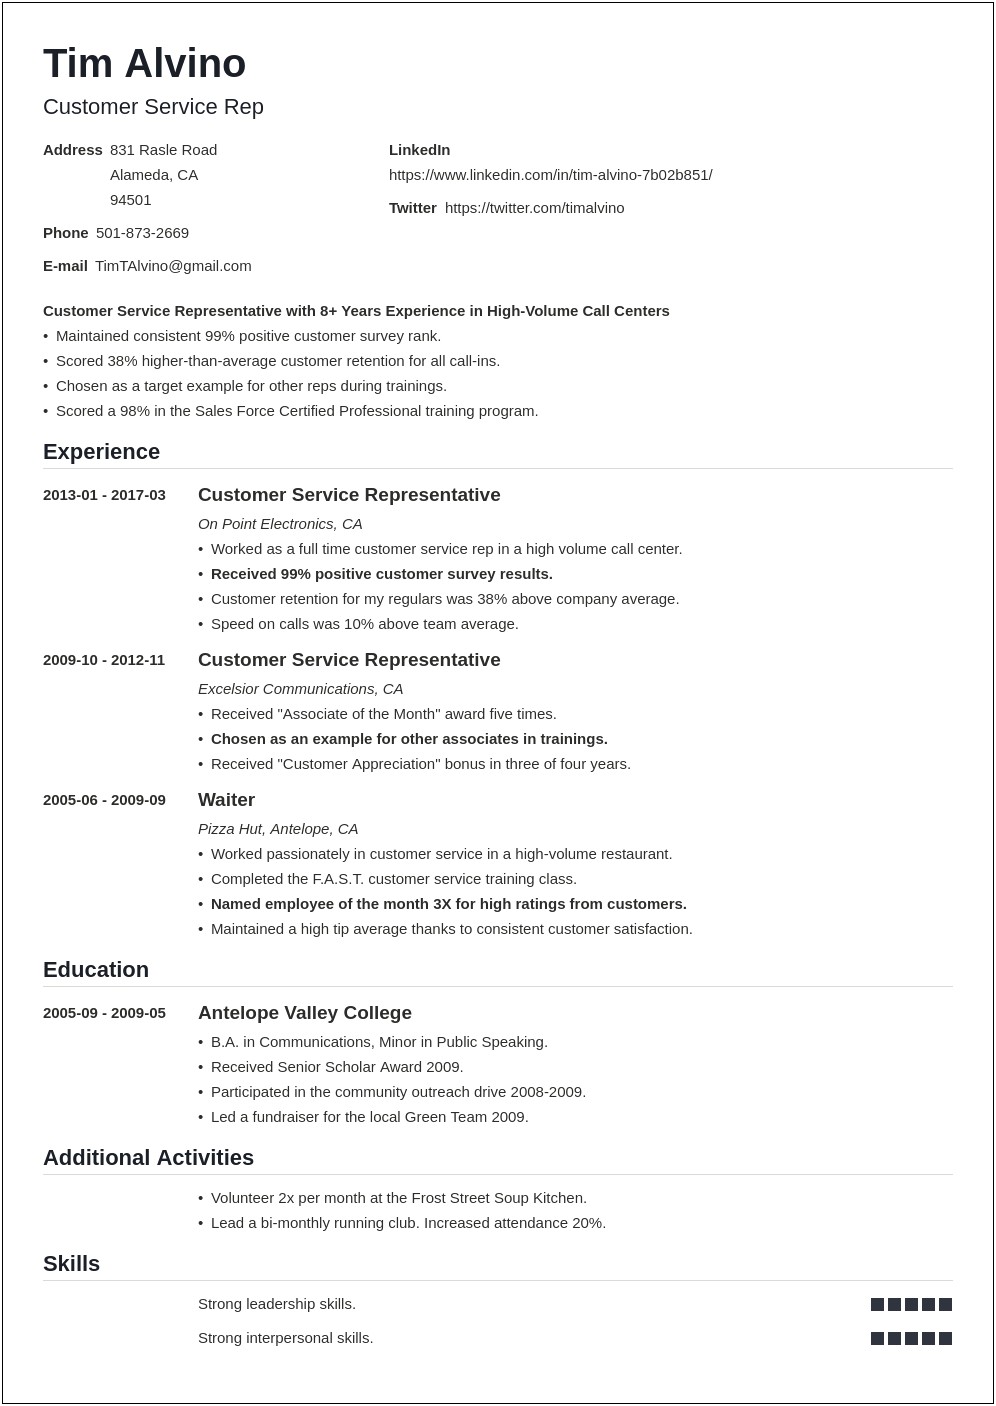 Sample Resume Objective Statements For Multiple Career